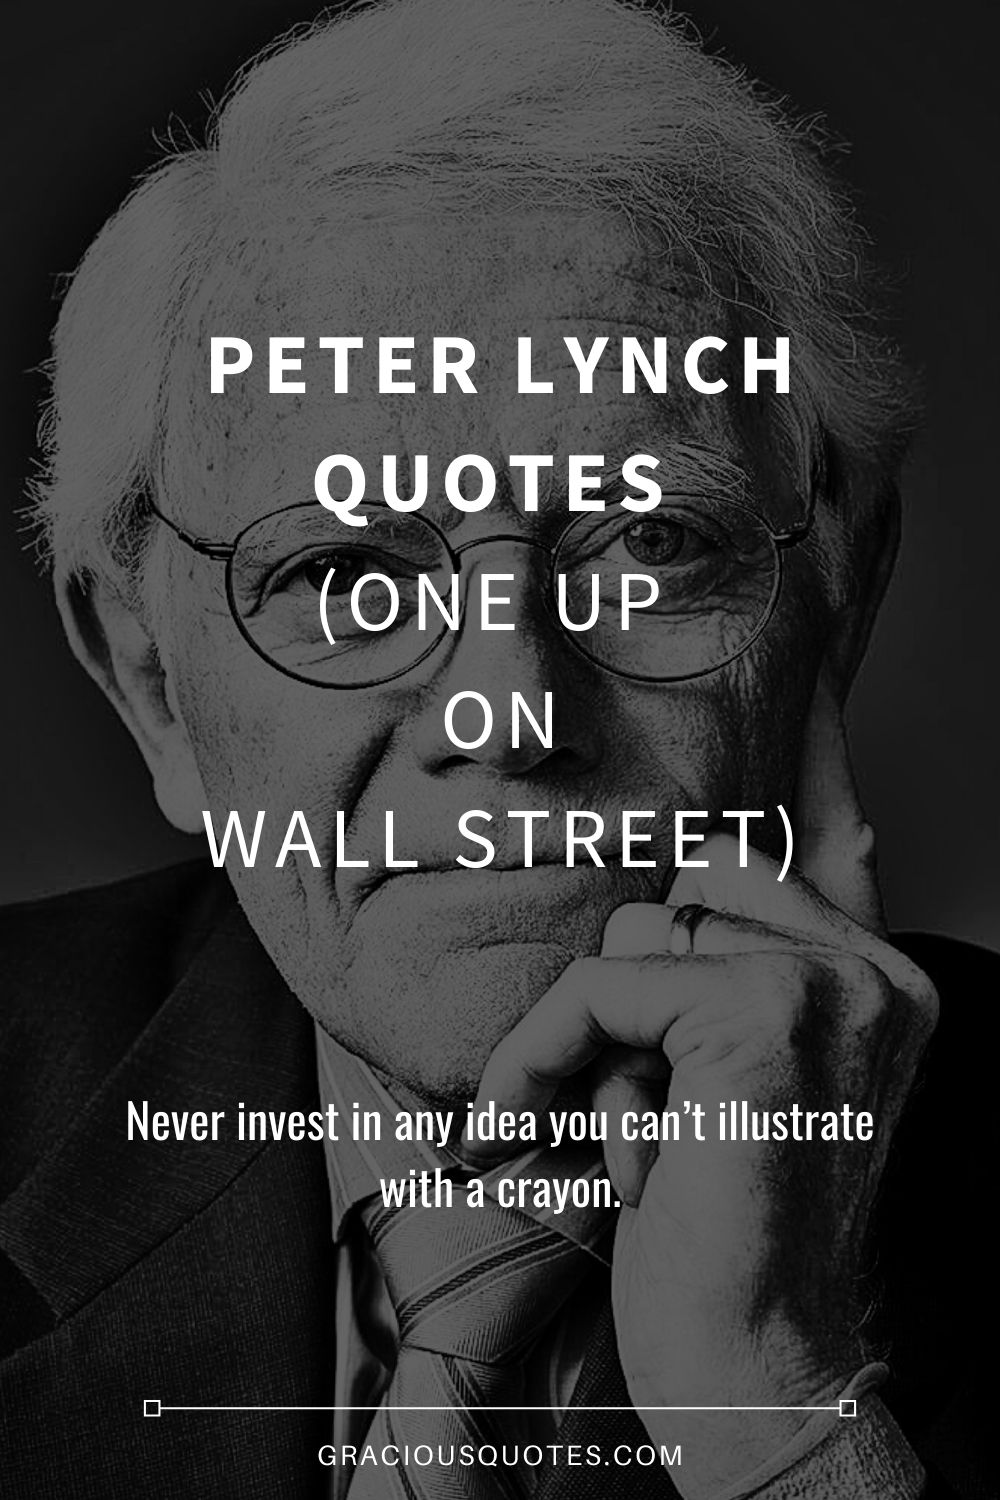 Peter Lynch Quotes (ONE UP ON WALL STREET)